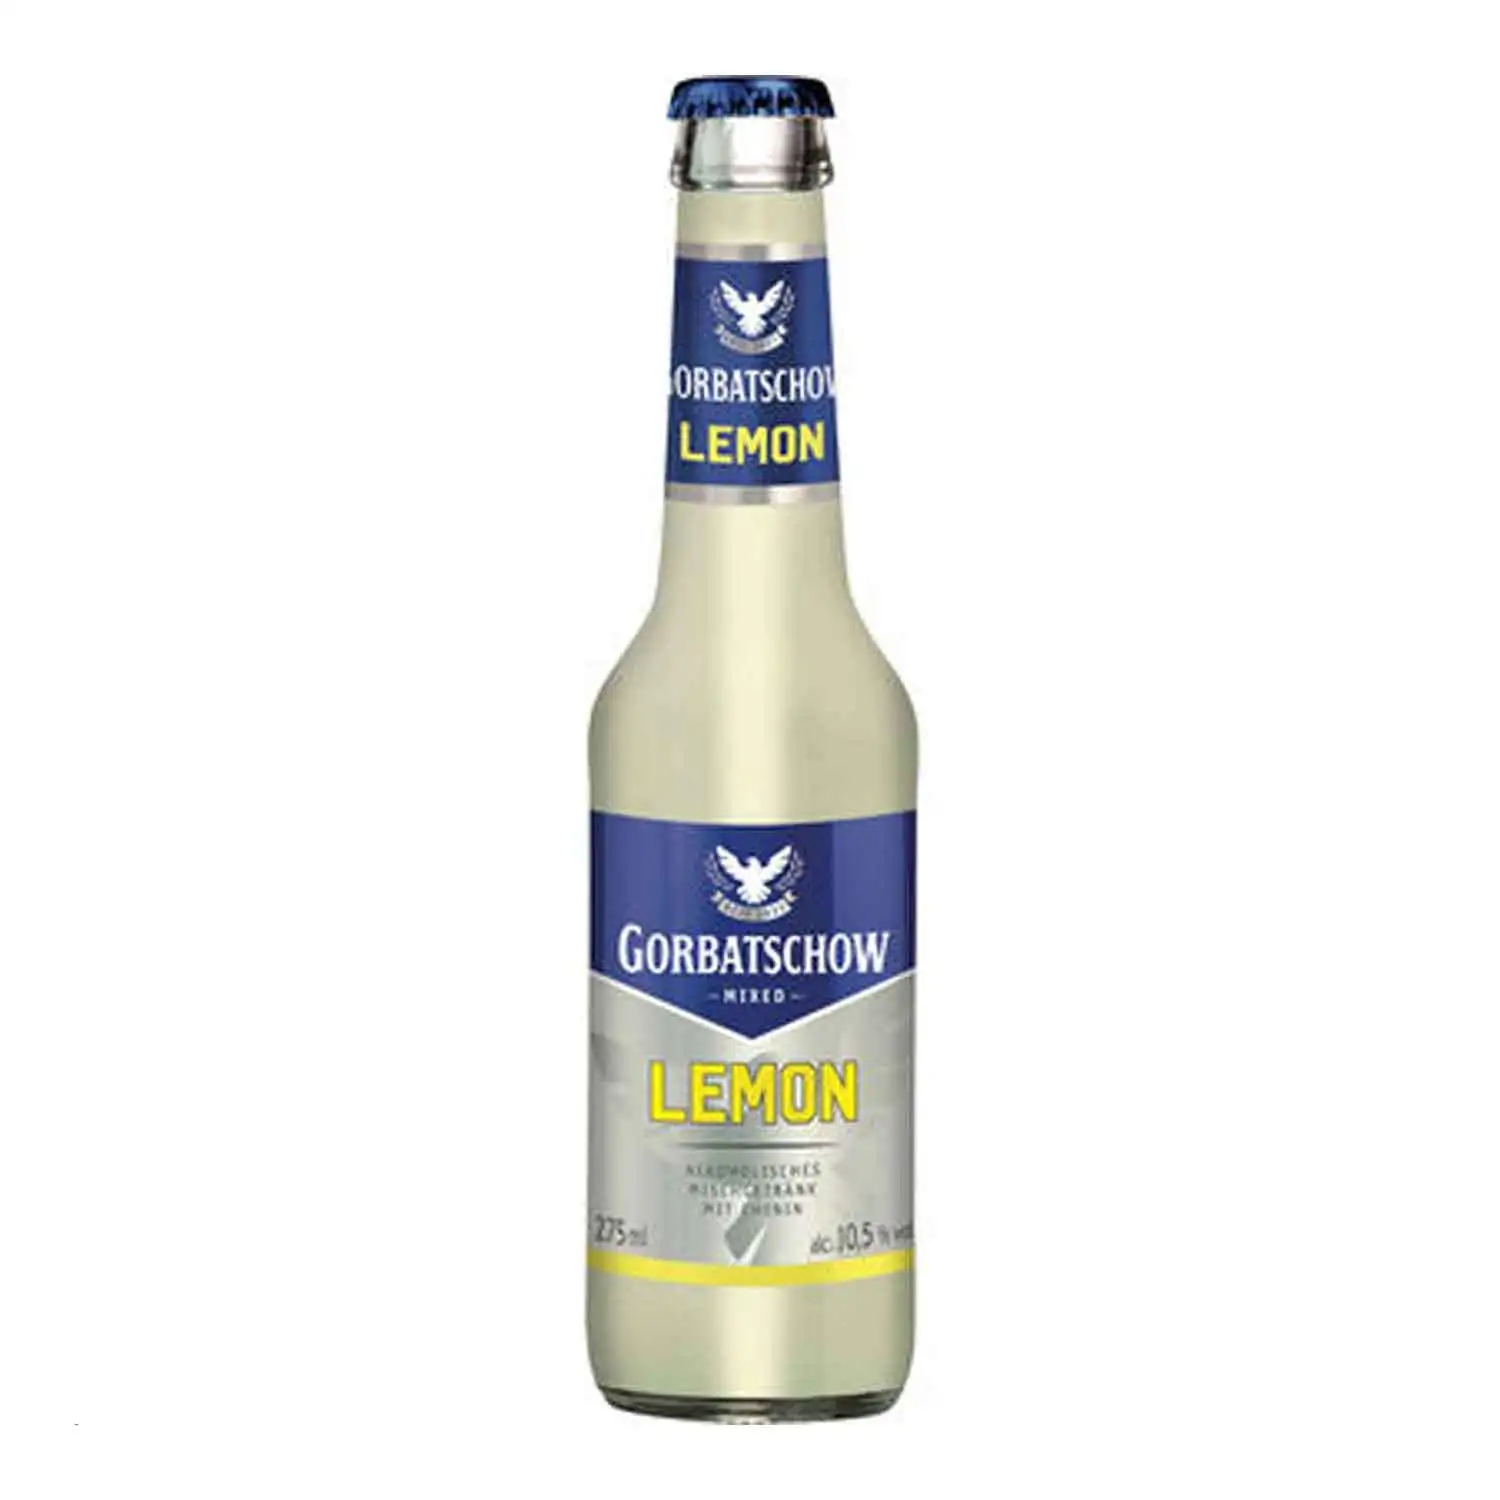 Gorbatschow citron 27,5cl Alc 10,5% - Buy at Real Tobacco